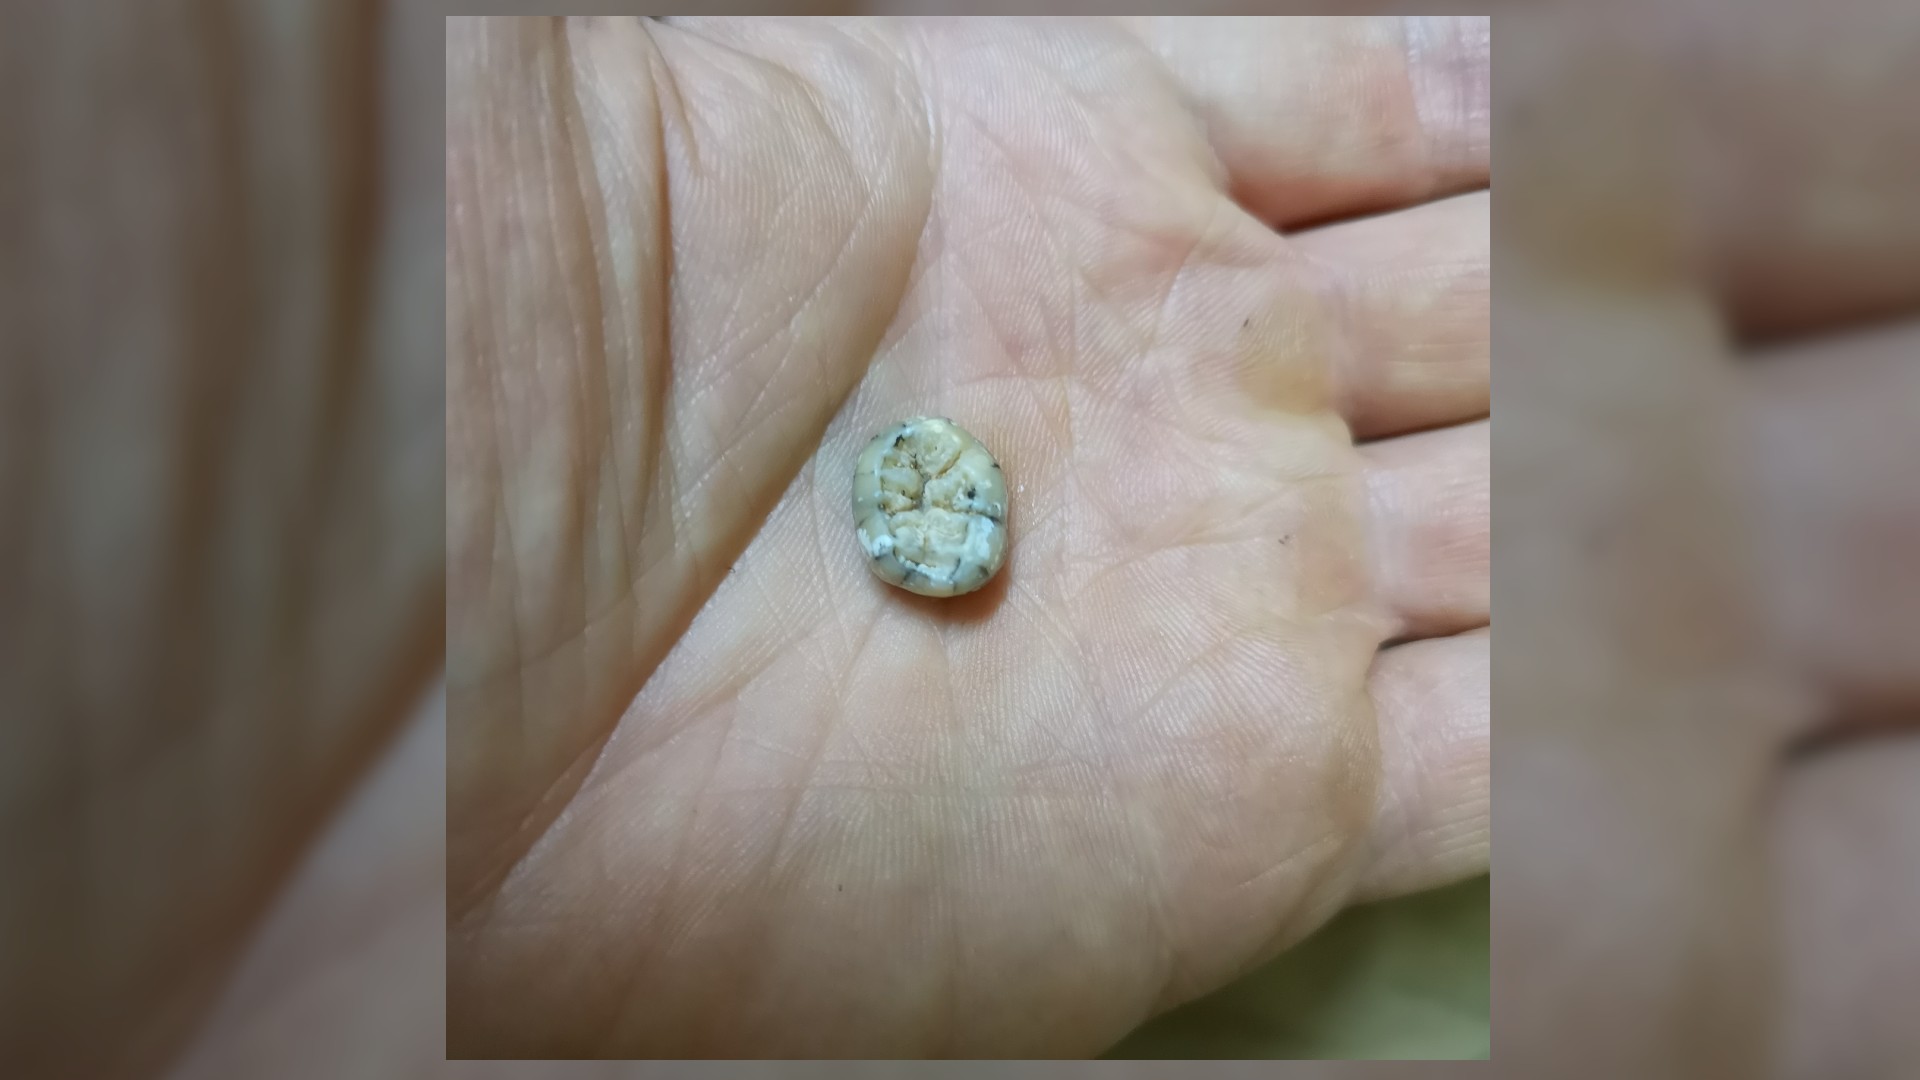 An ancient tooth (specifically a molar) being displayed in the center of a person's palm.